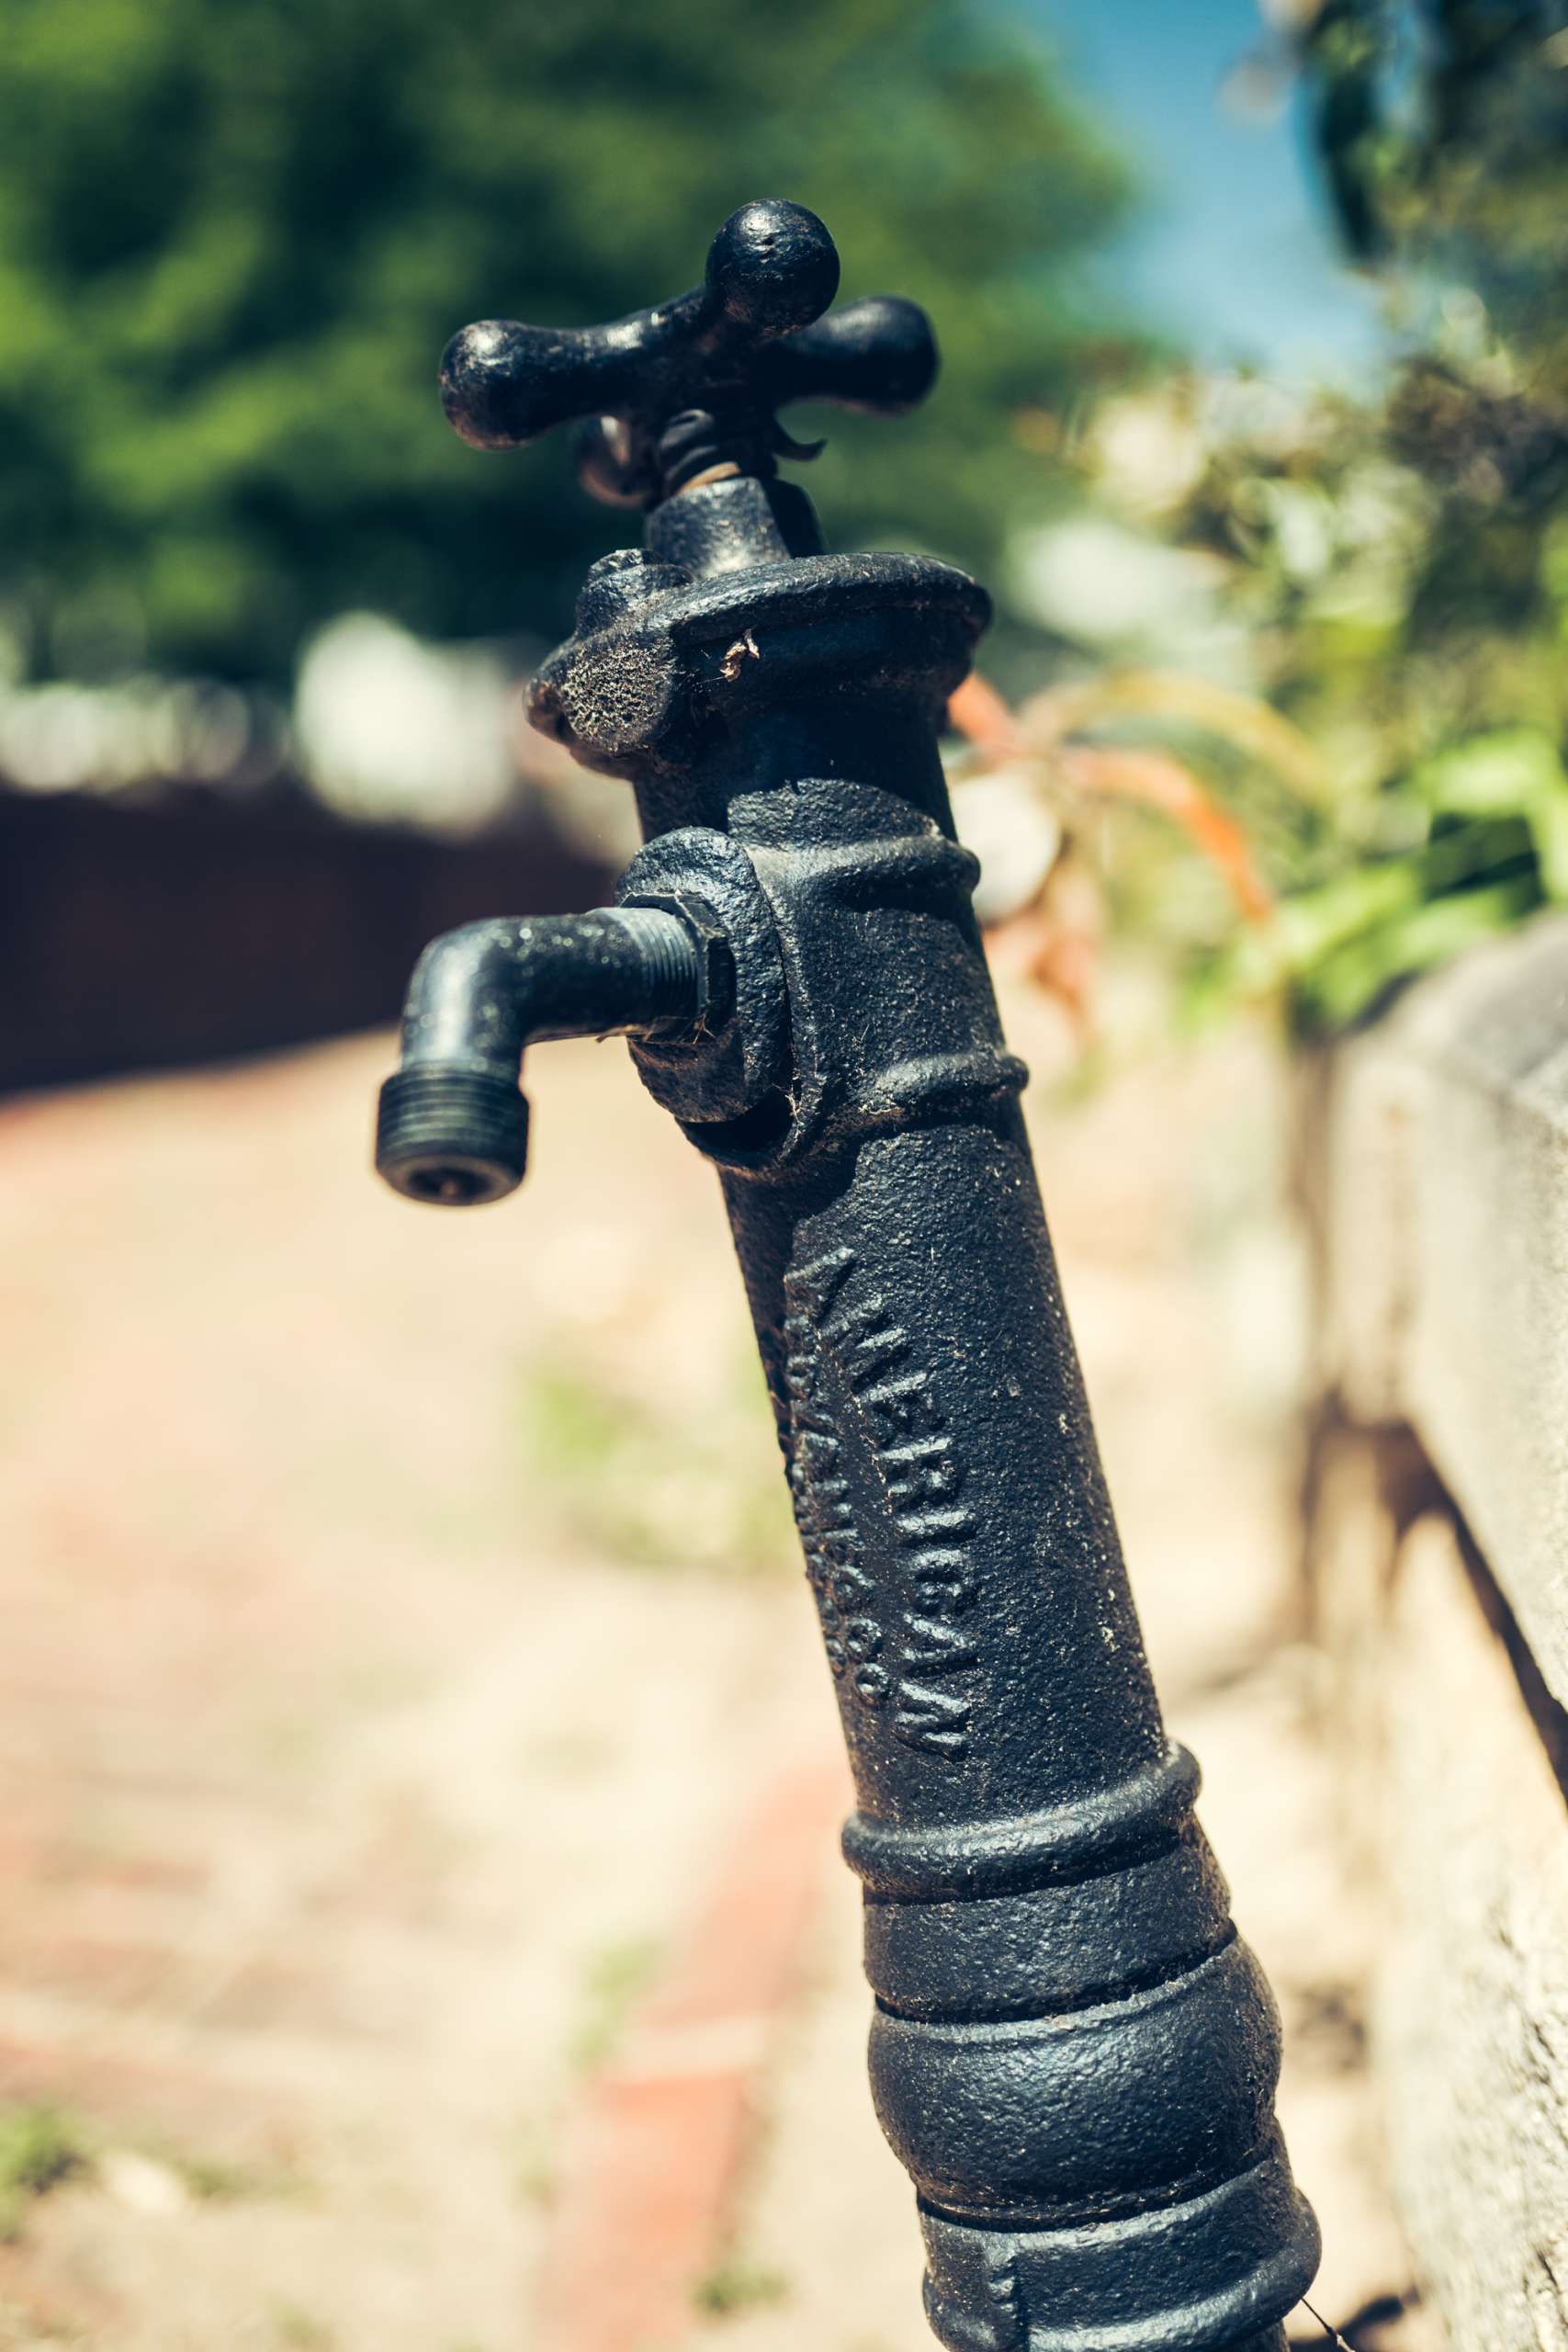 A black water faucet.